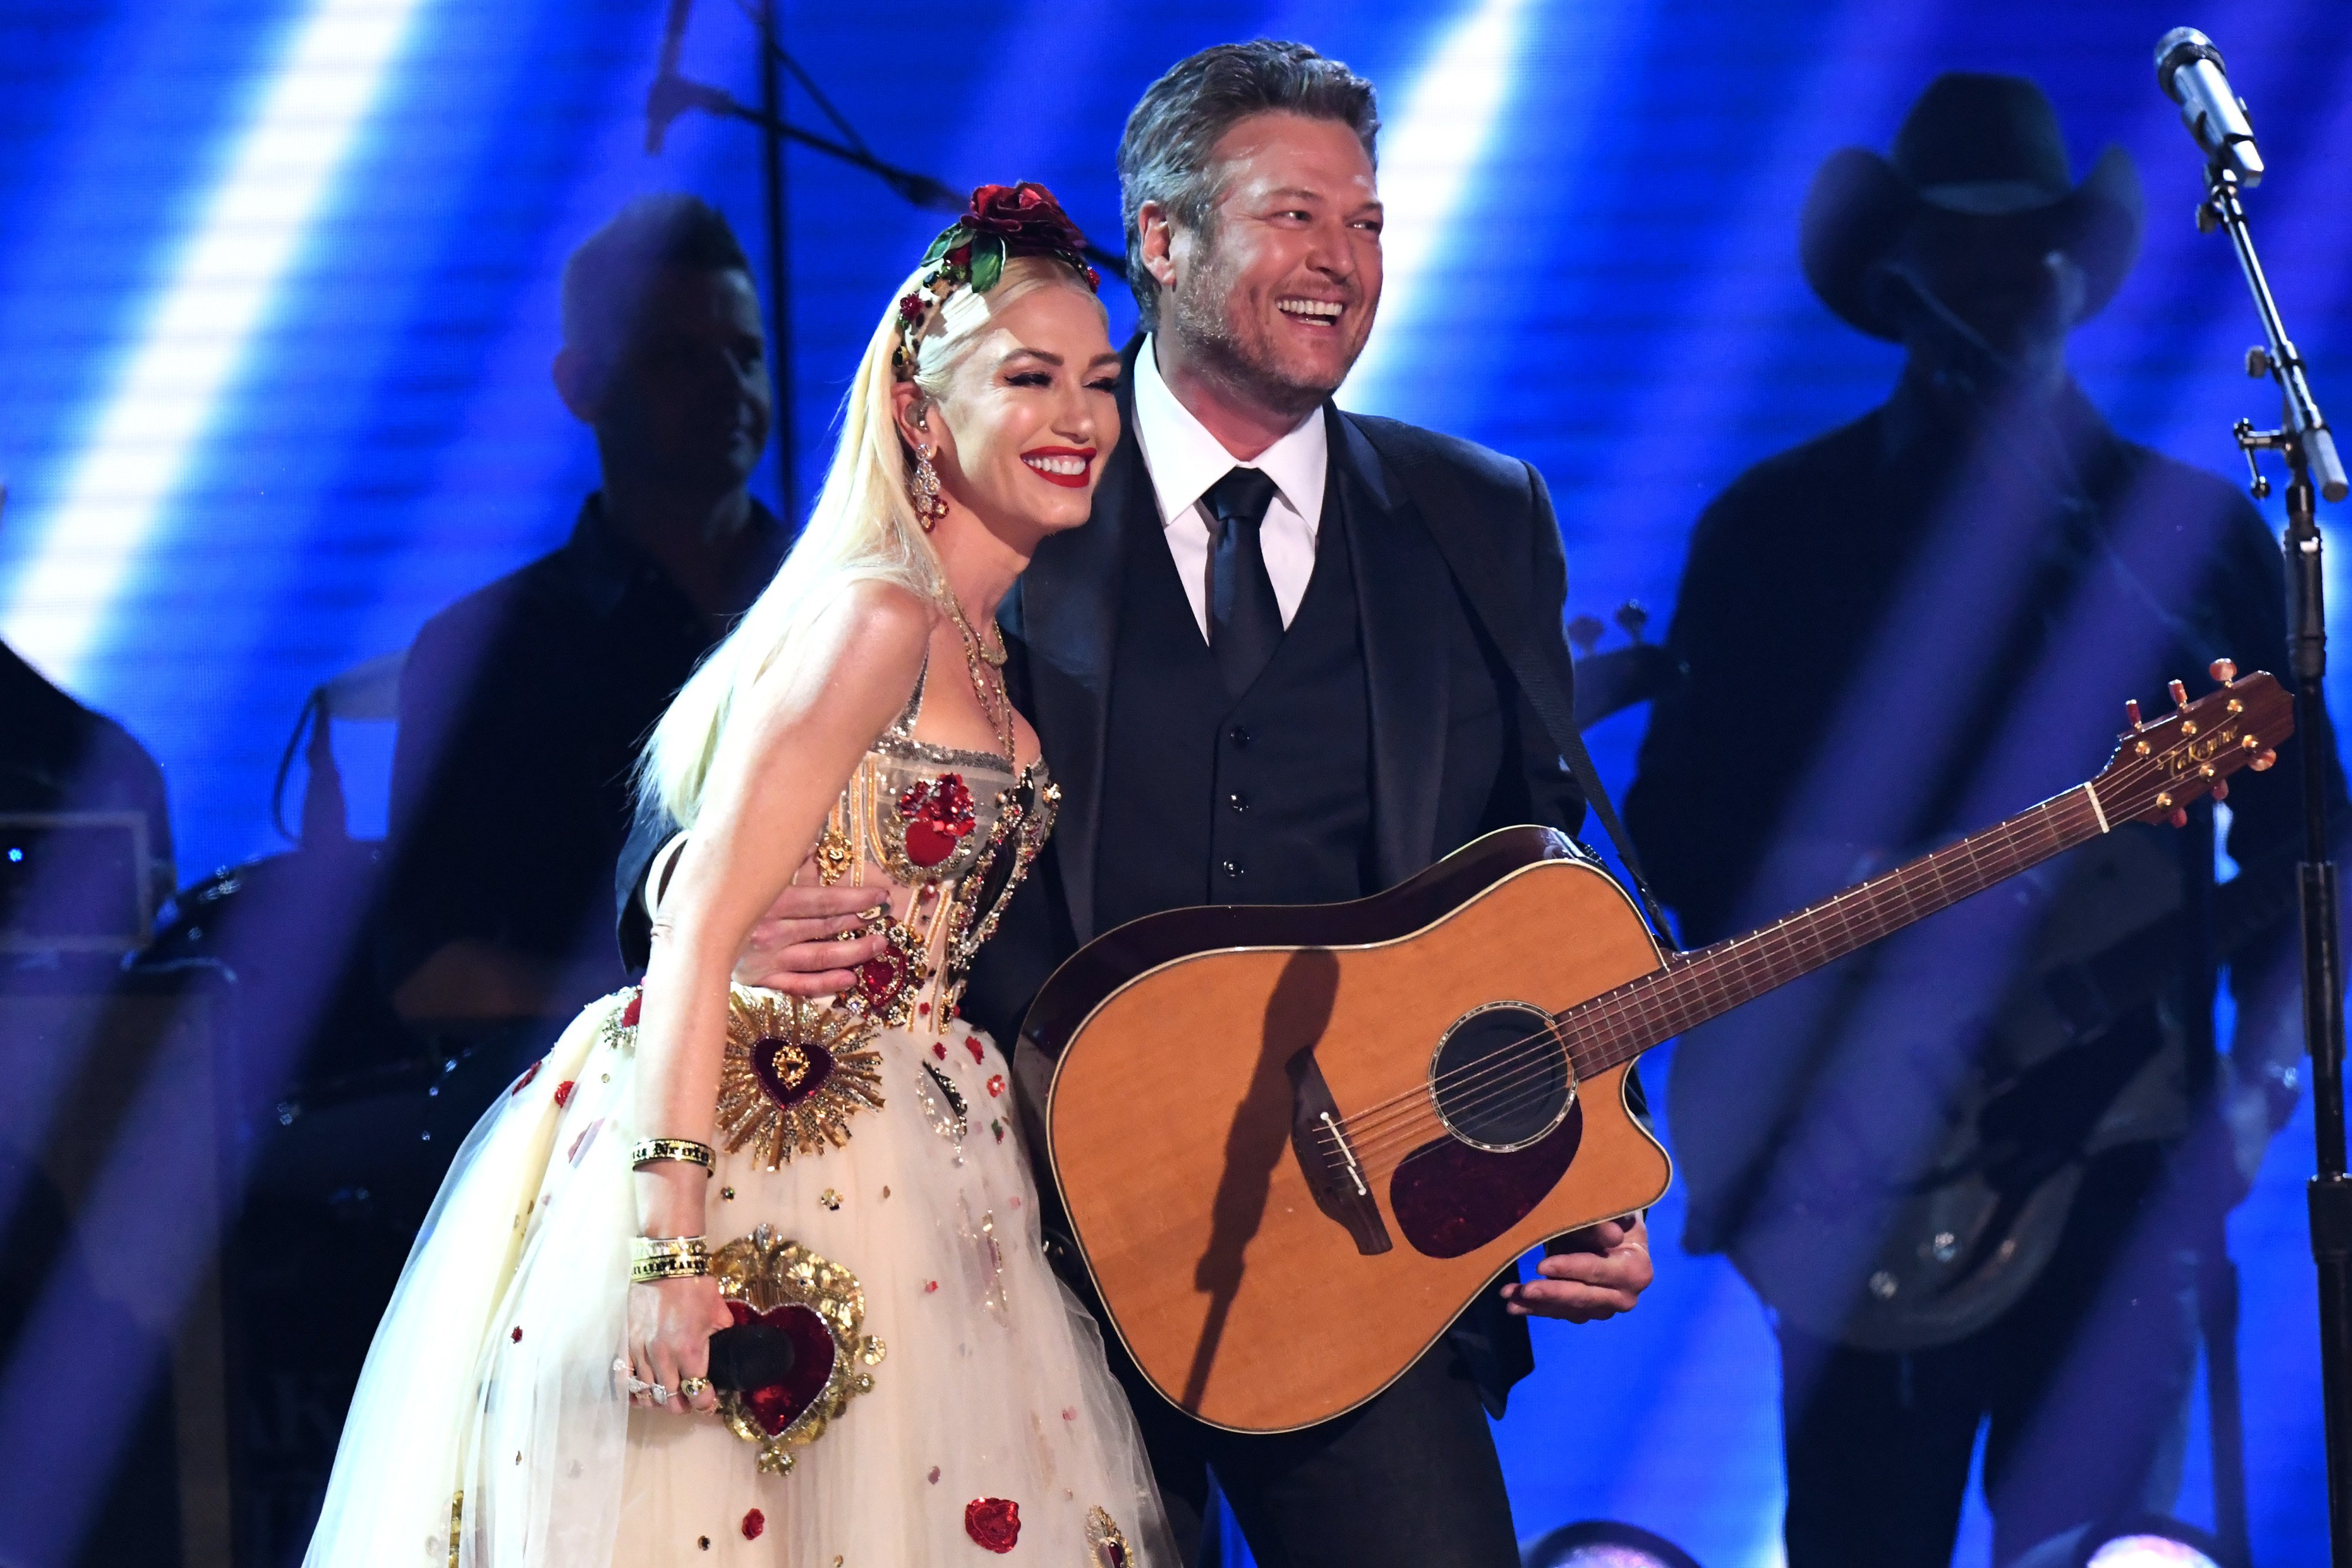 Gwen Stefani and Blake Shelton onstage during the 62nd Annual GRAMMY Awards at Staples Center on January 26, 2020, in Los Angeles, California. | Source: Getty Images.